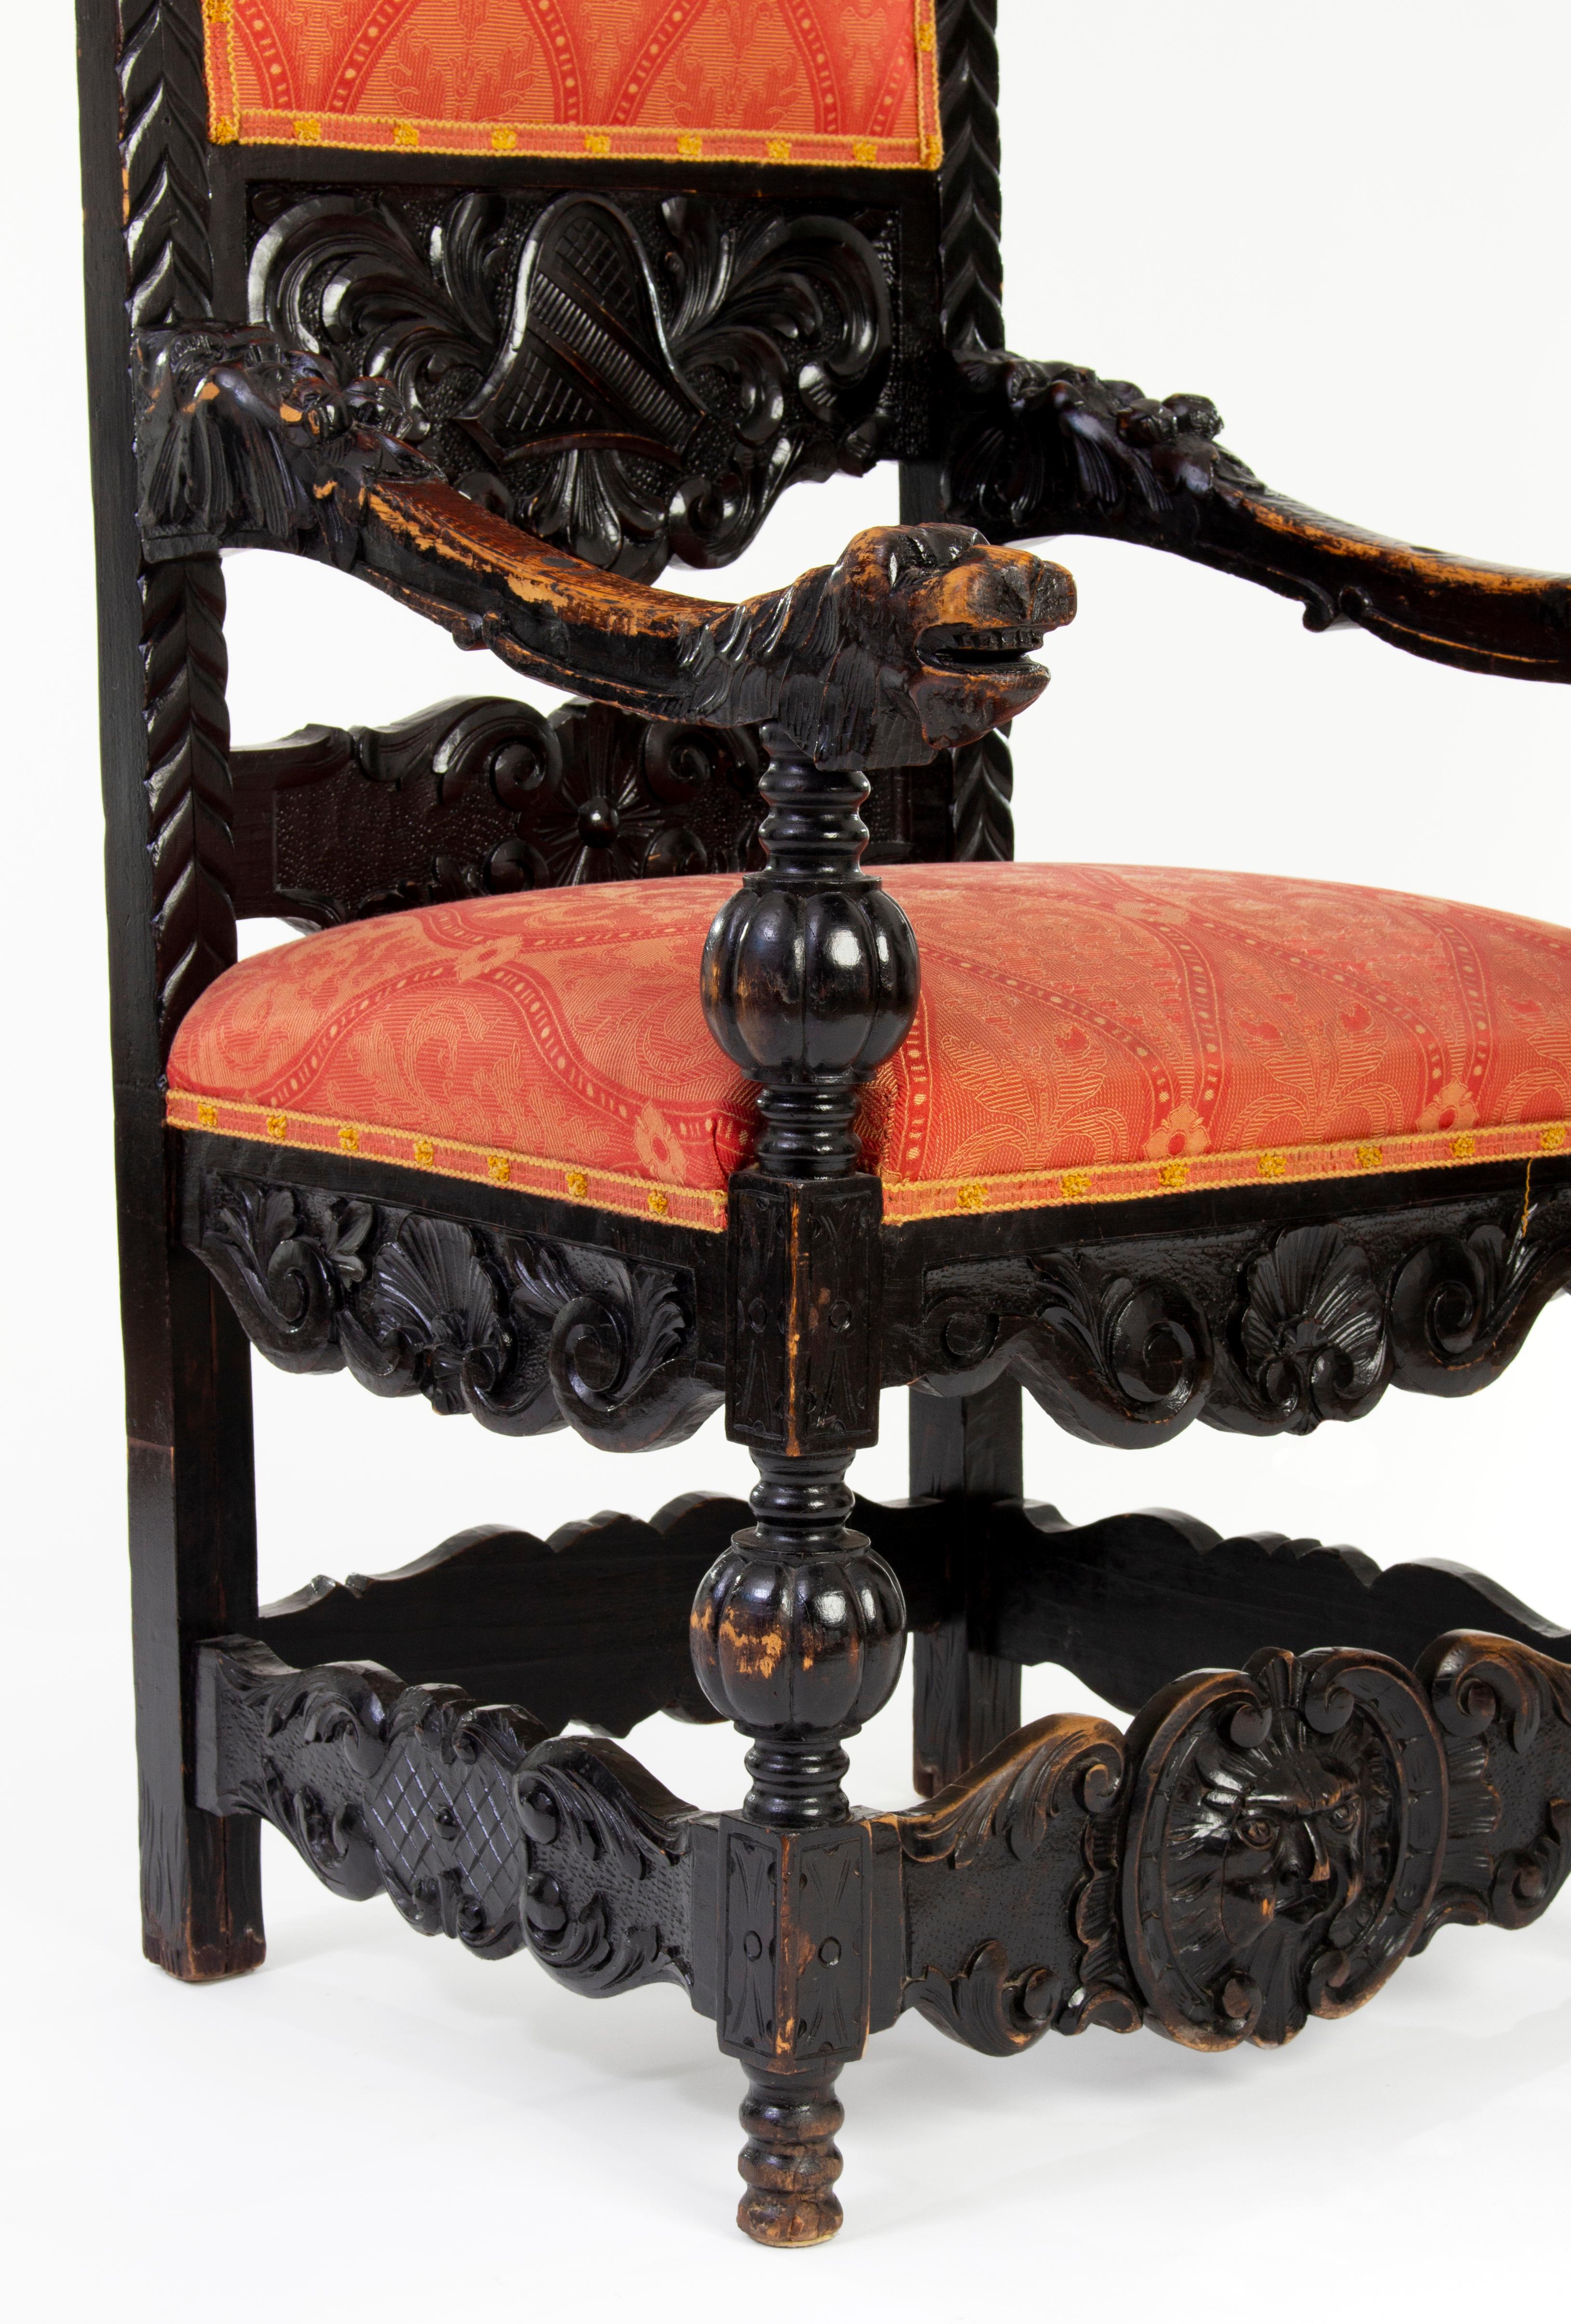 European Antique Carved Basswood Throne Chairs in Historicist Style, ca. 1900 For Sale